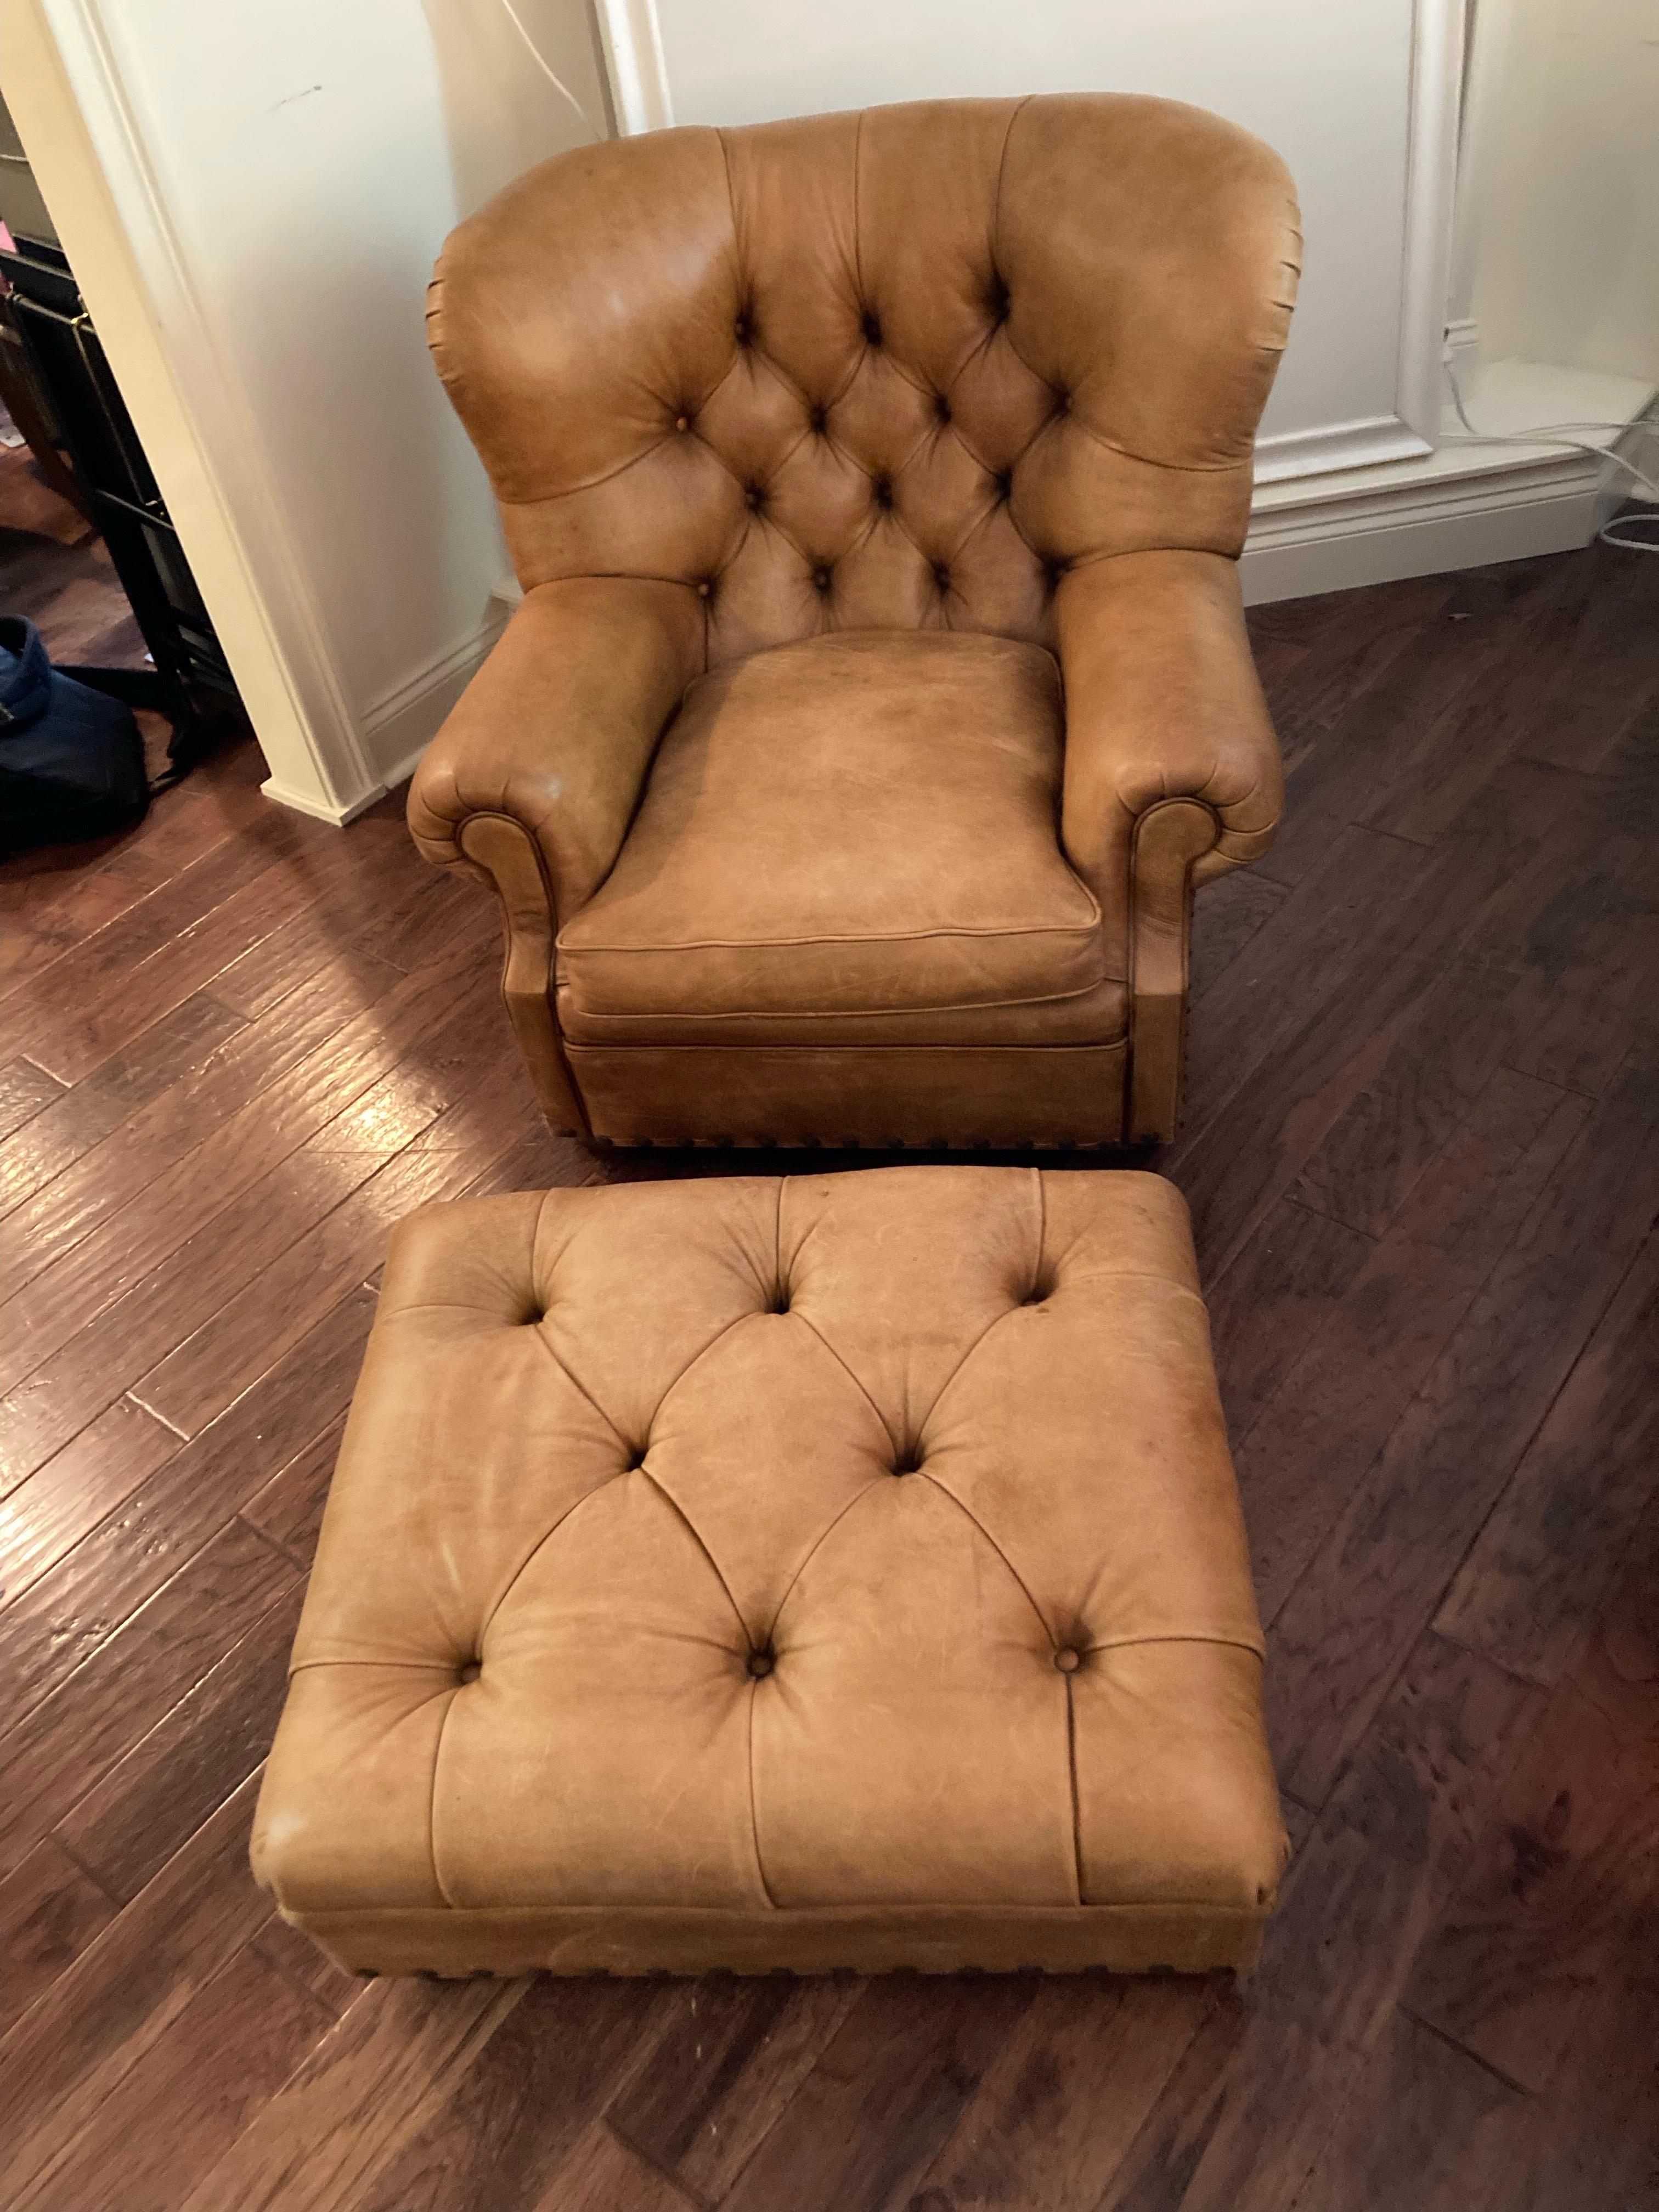 Classic and handsome buttery butterskotch tufted leather Writer's club chair and matching ottoman having mahogany bun feet and nailhead trim. Super comfy and inviting. Measures: chair: 41 W x 41 D x 36 H, arm height 22, arm width 8 between arms 21